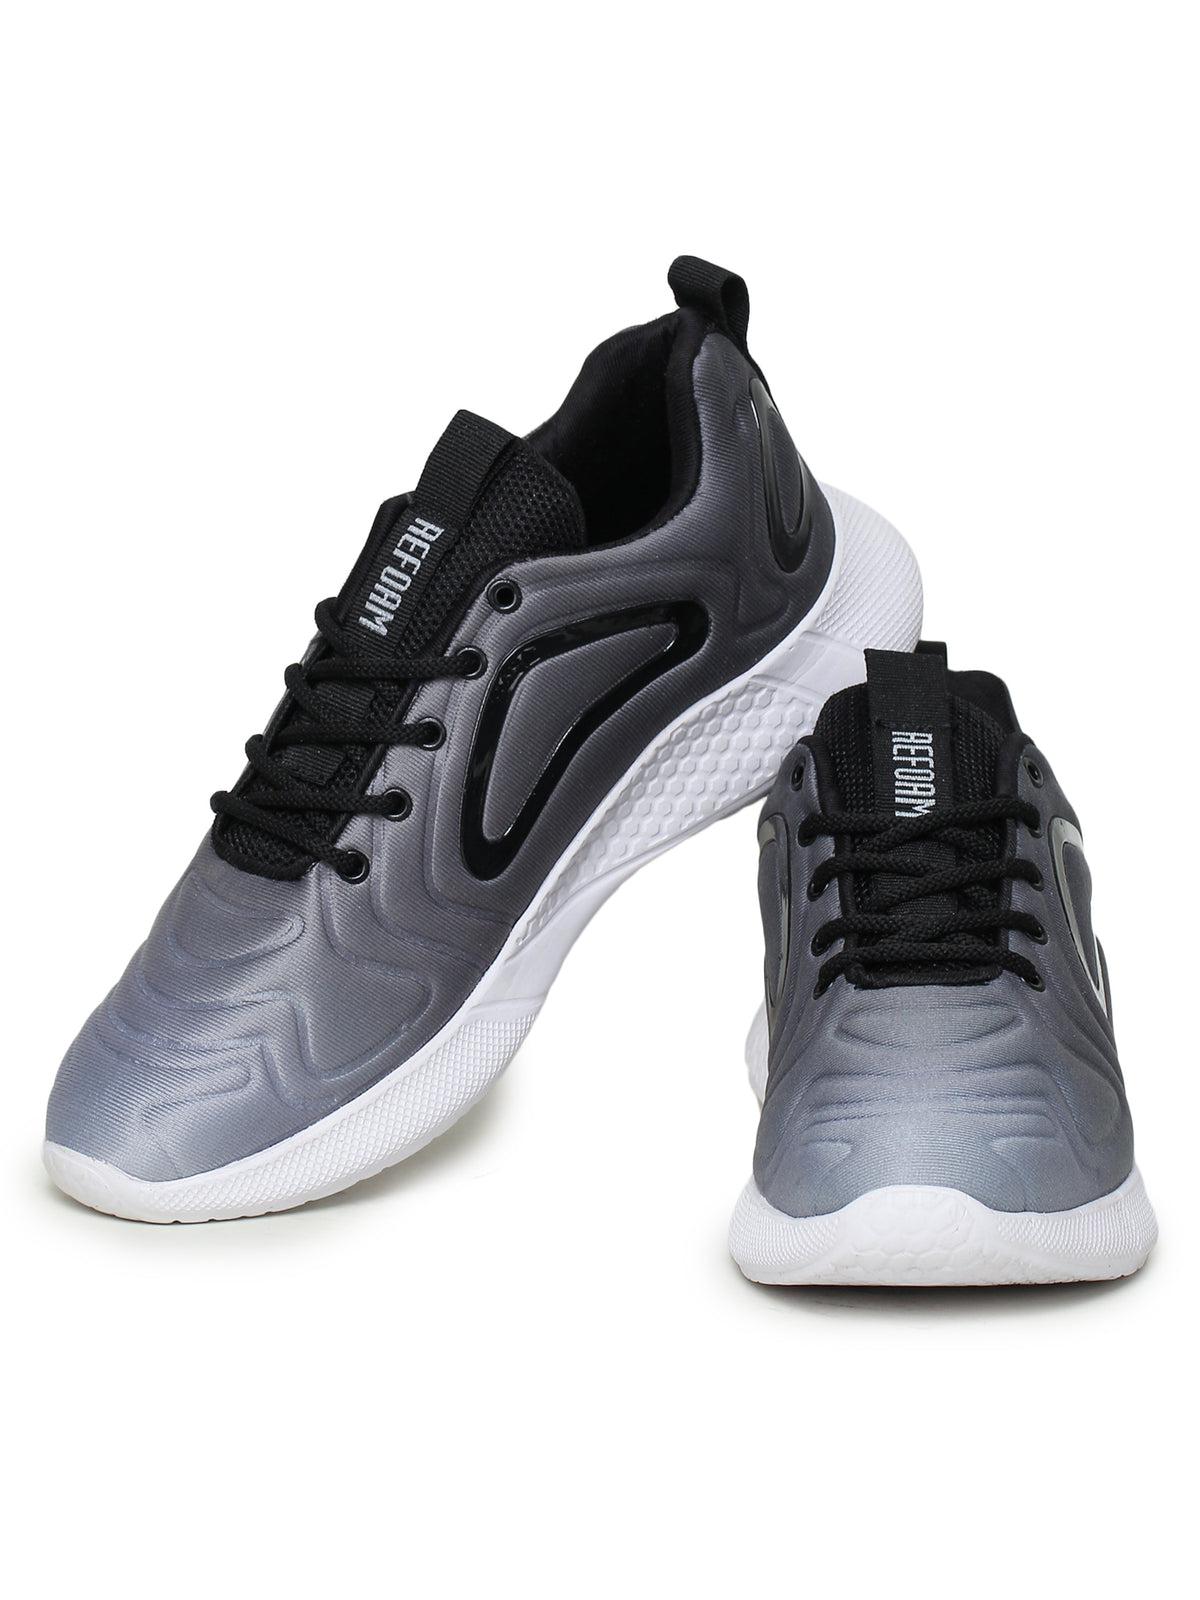 Grey Solid Fabric Lace Up Running Sport Shoes For Men